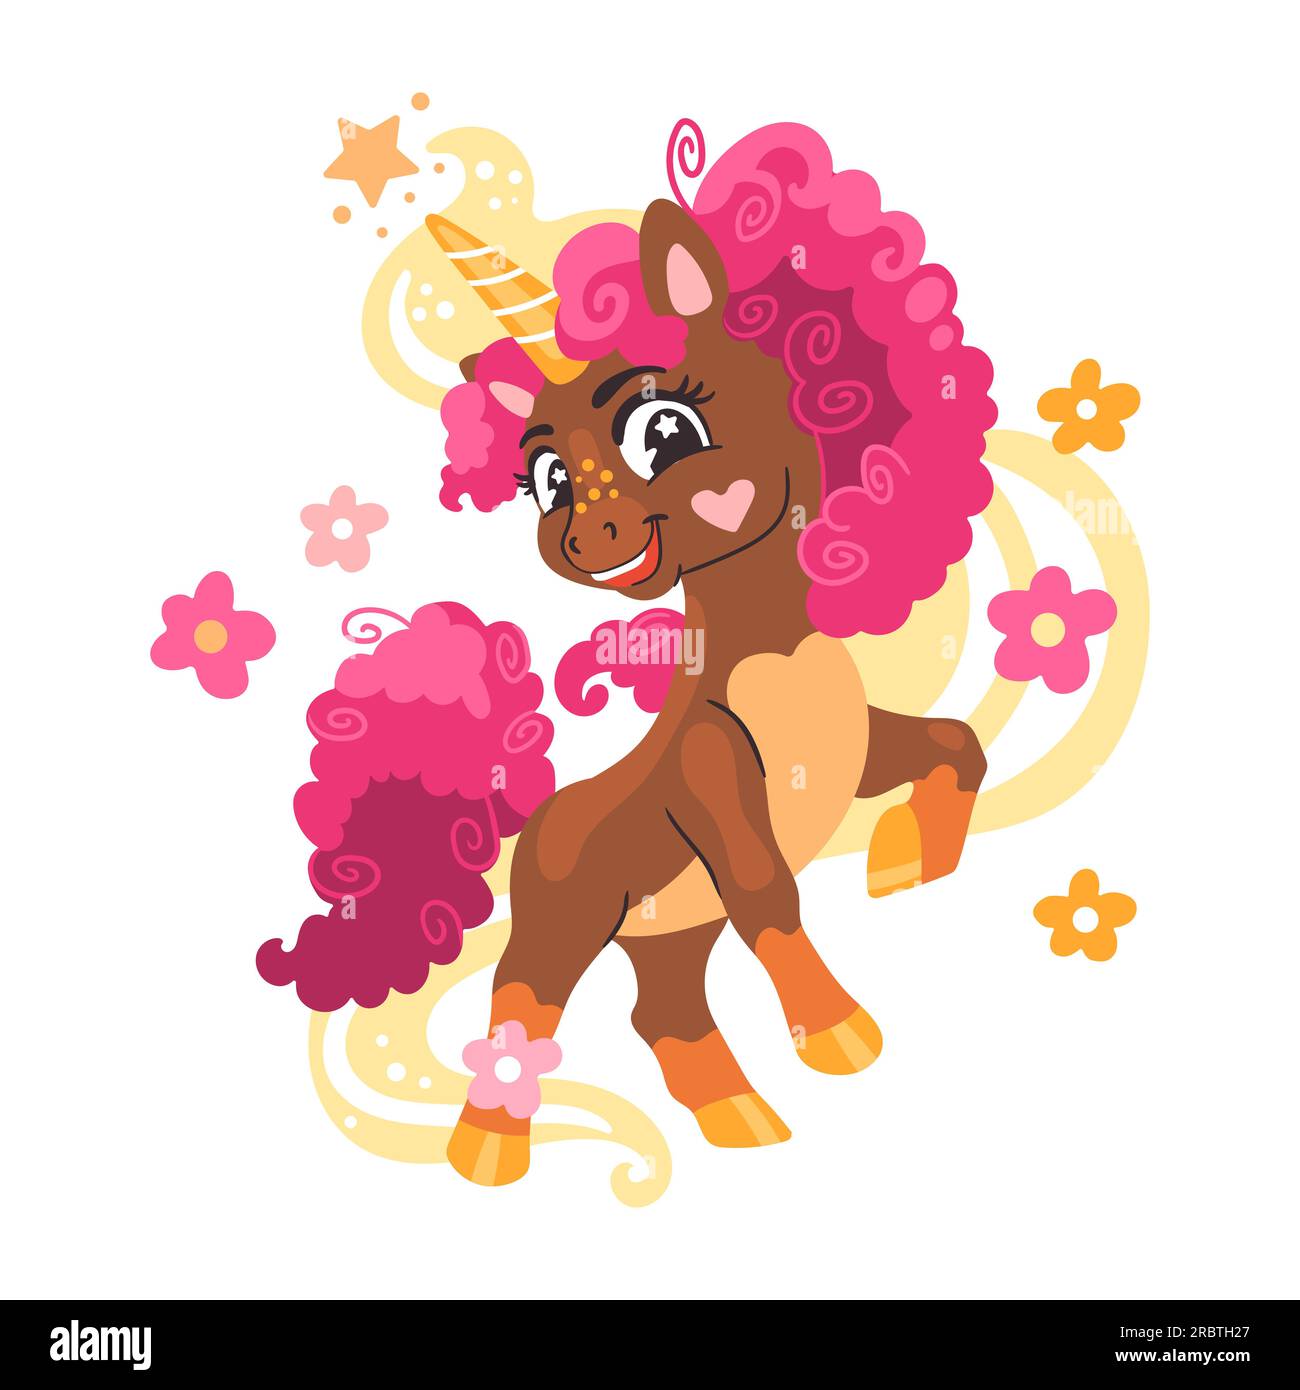 Cute cartoon character black skin unicorn with pink mane and flowers. Vector isolated illustration. White background. Happy magic unicorn. For print, Stock Vector